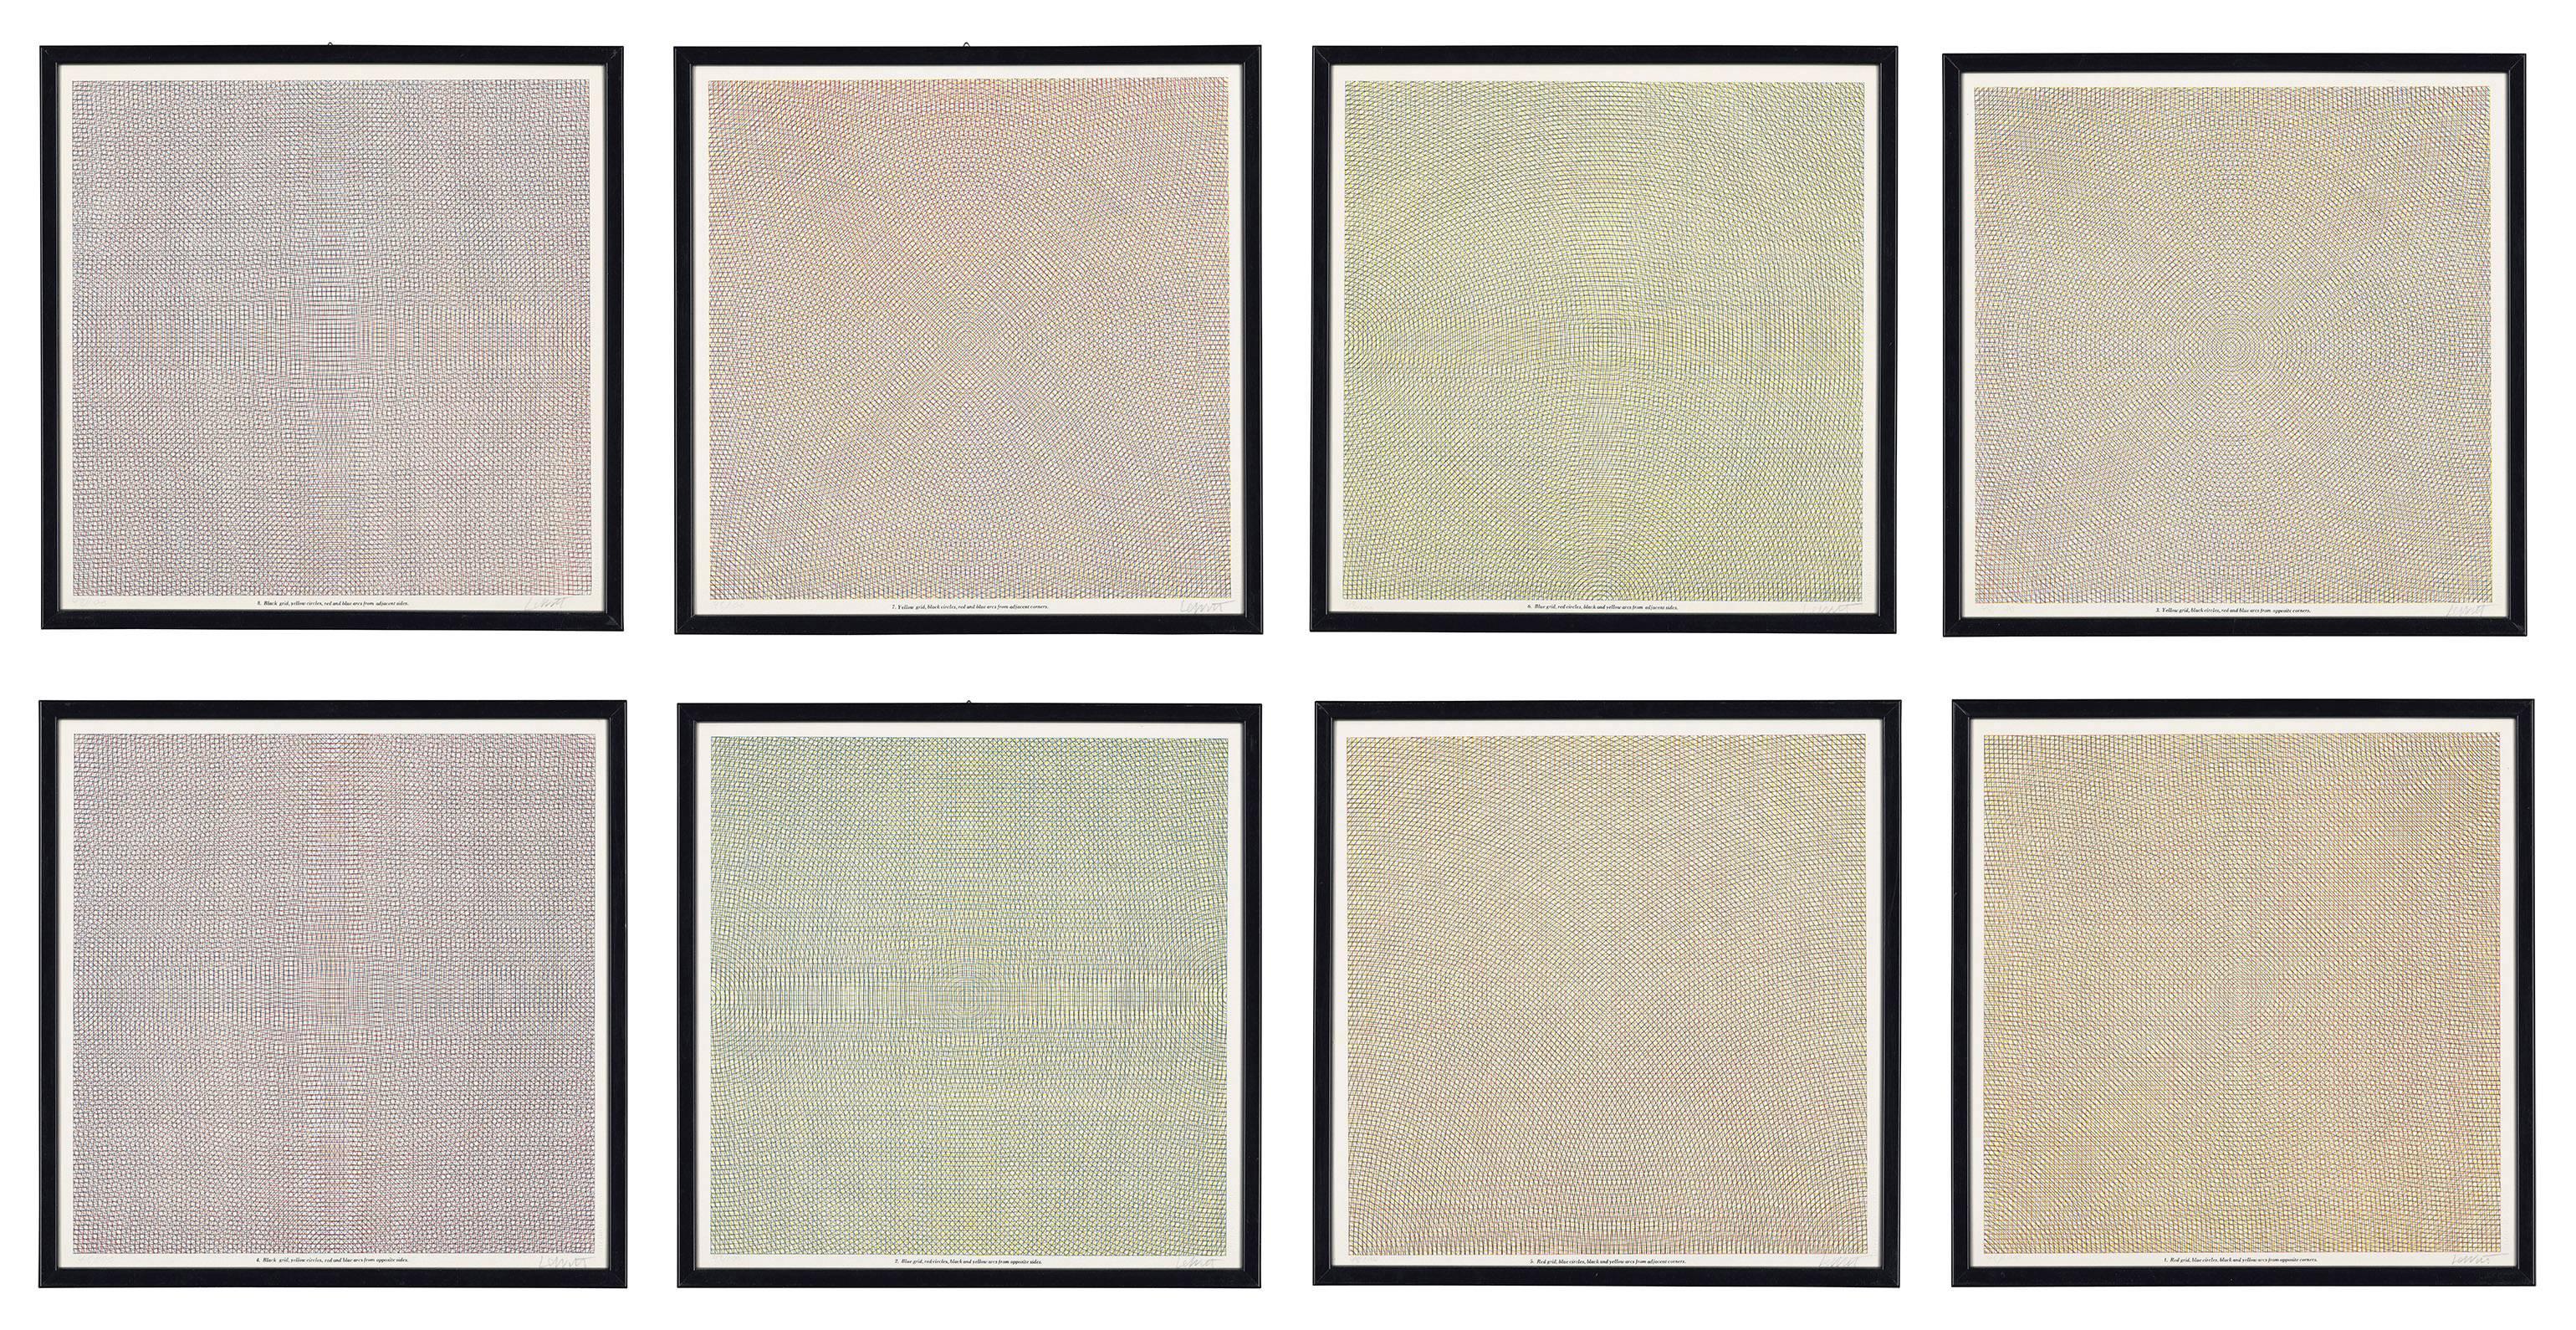 Arcs from Sides or Corners, Grids & Circles - Print by Sol LeWitt